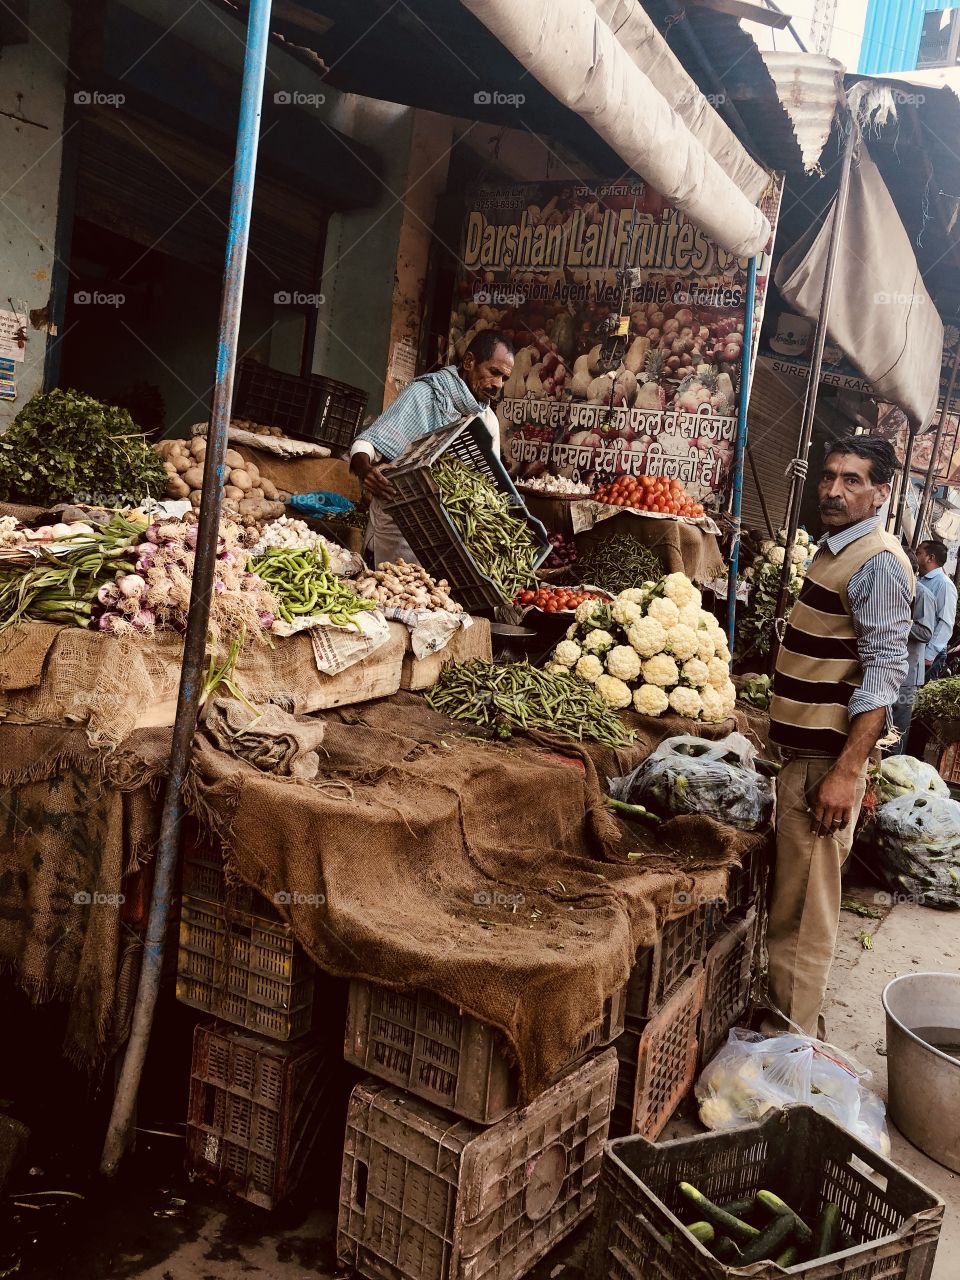 Vegetables & Fruit Markets Streets of India 🇮🇳